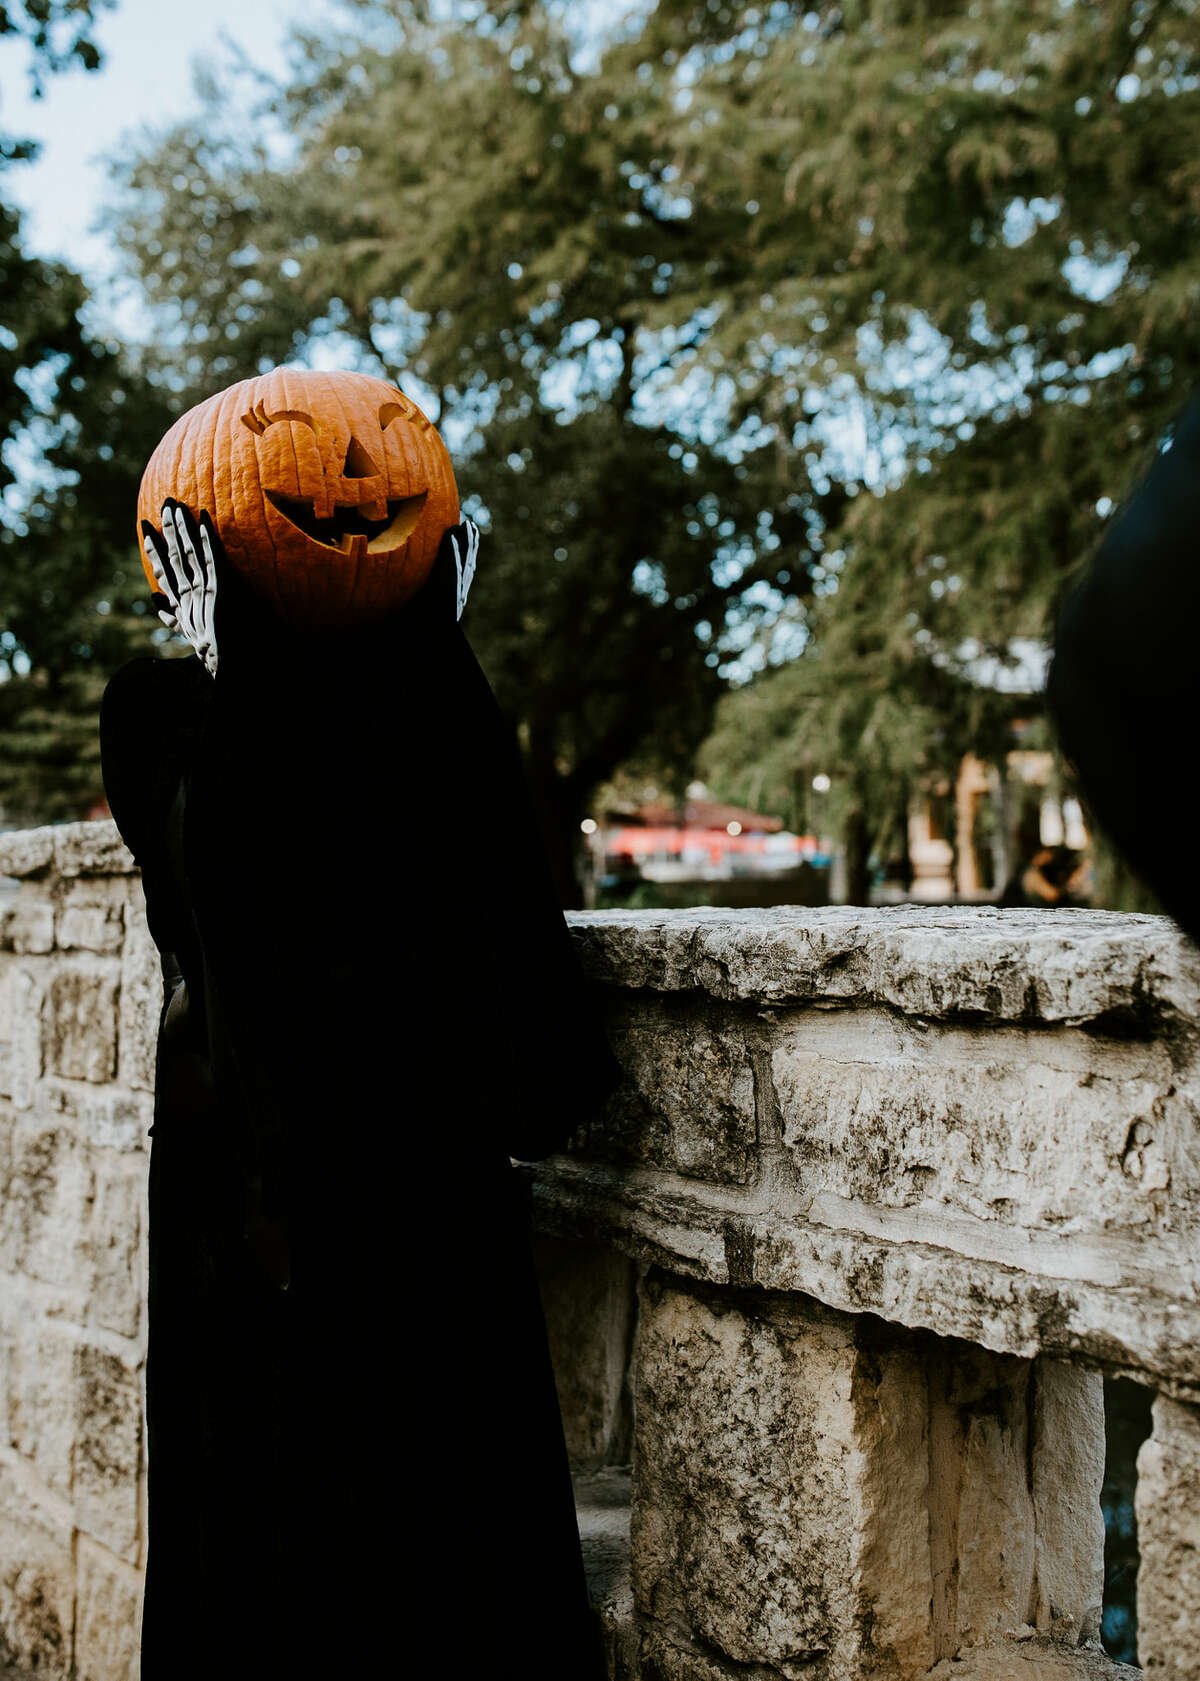 San Antonio photographer comes up with a Halloween love story for